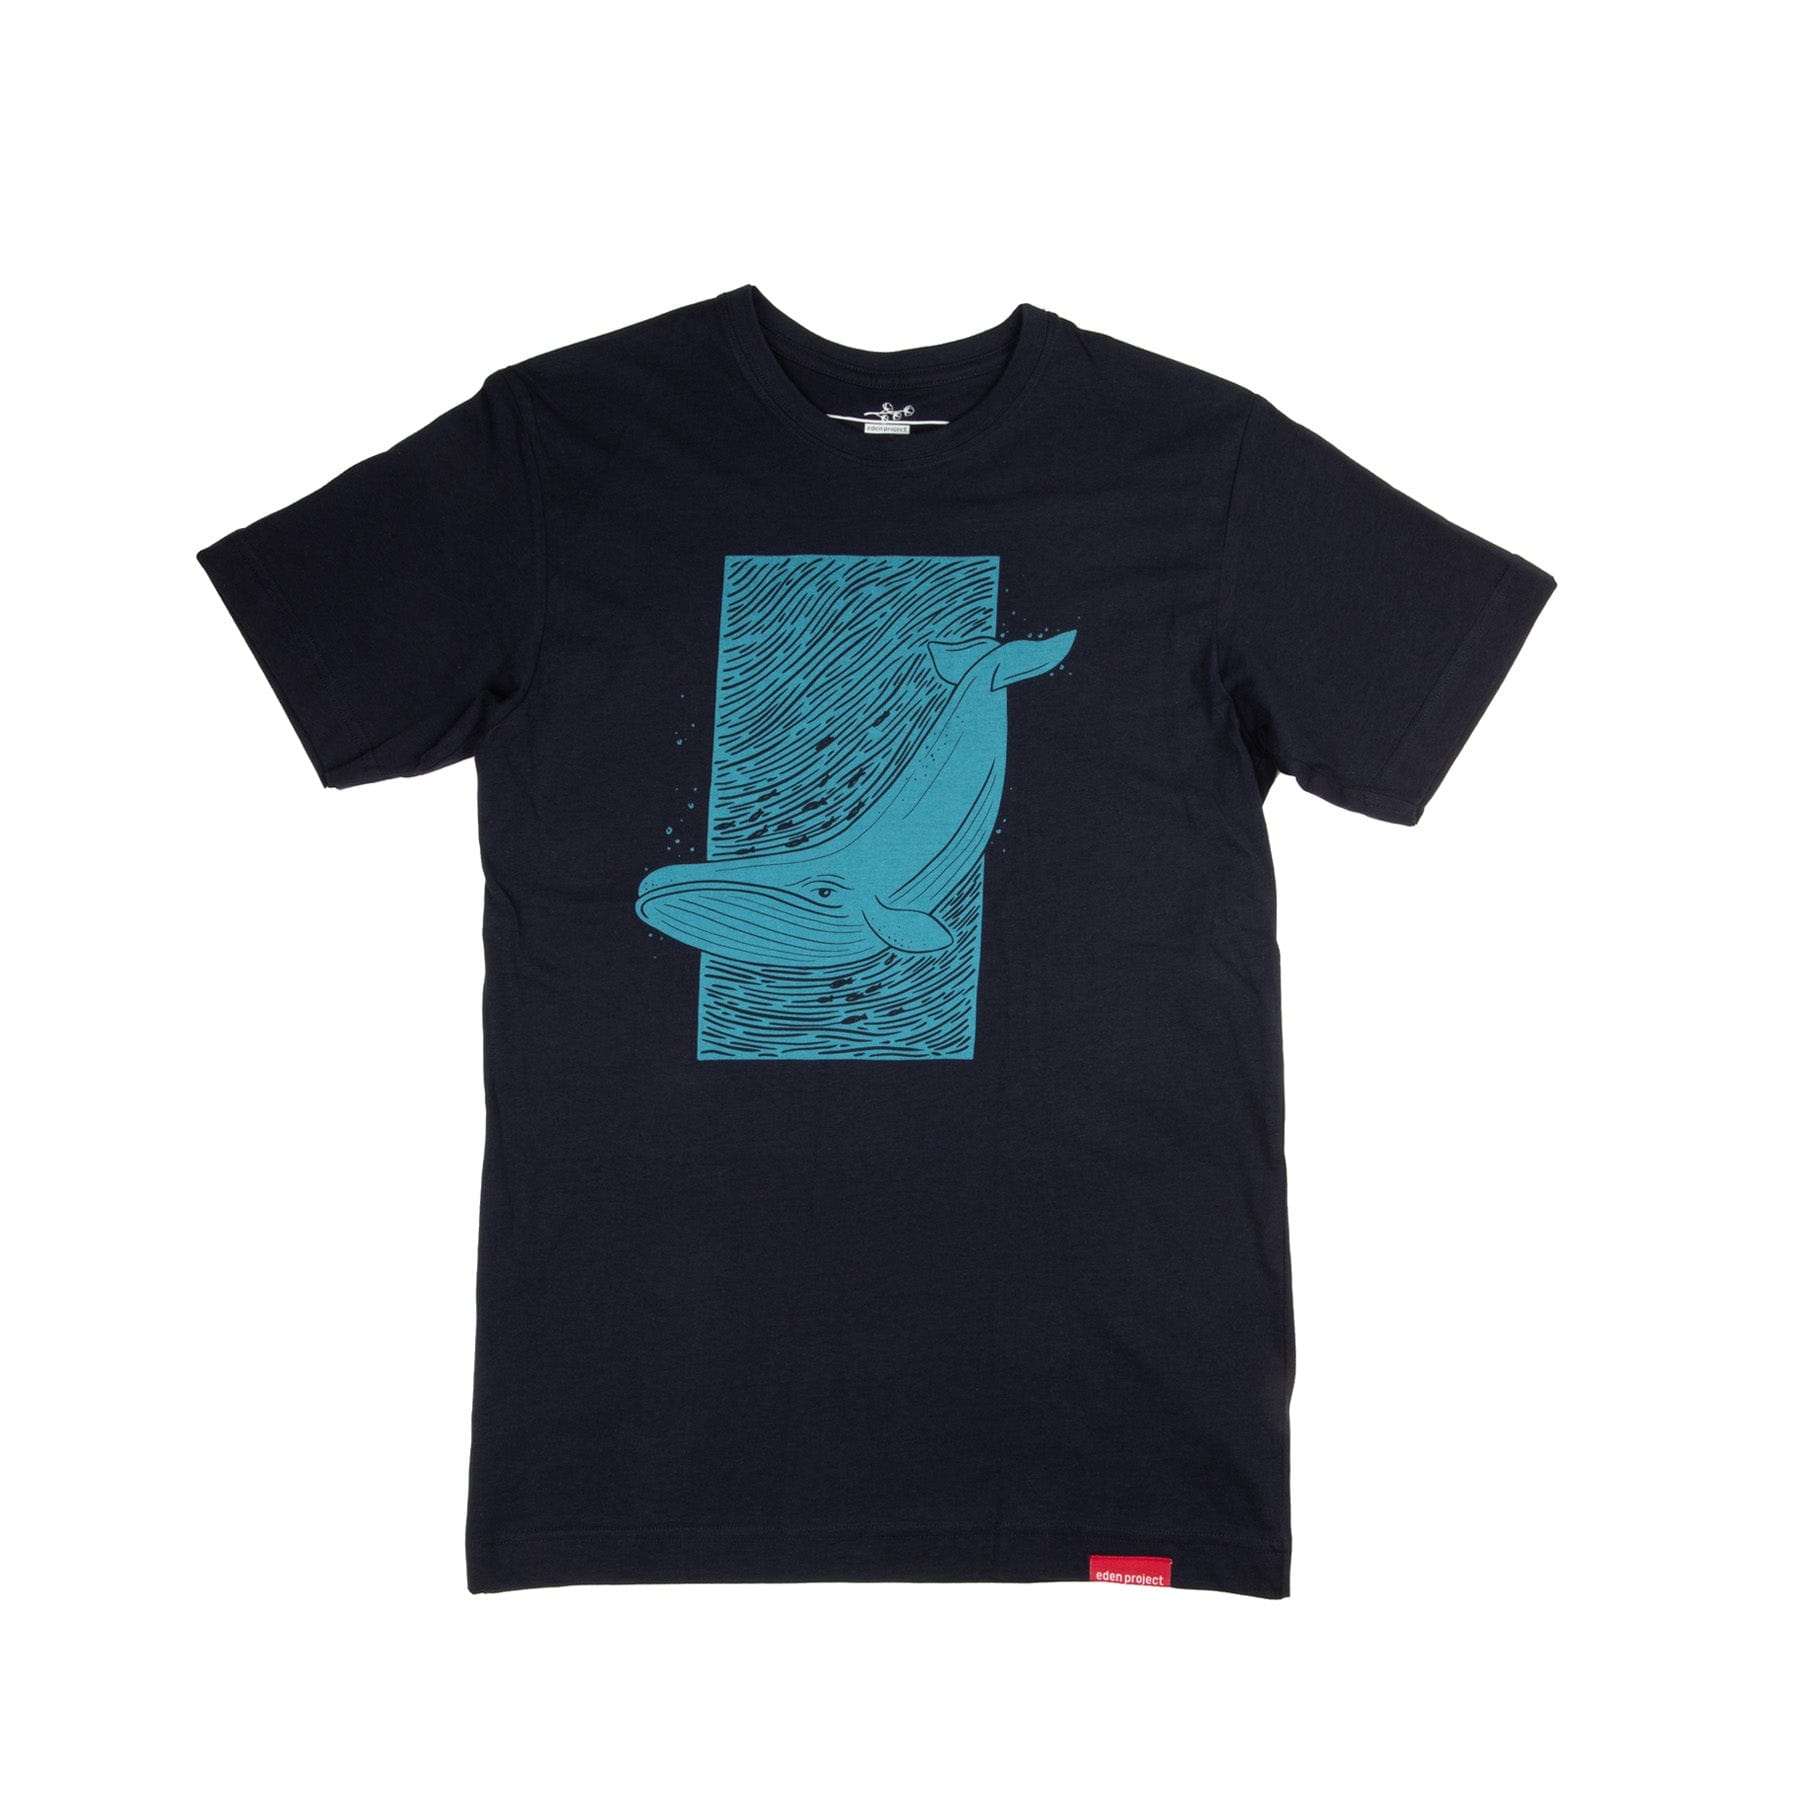 Navy blue t-shirt with whale print design on front, casual crew neck short-sleeve tee, isolated on white background.